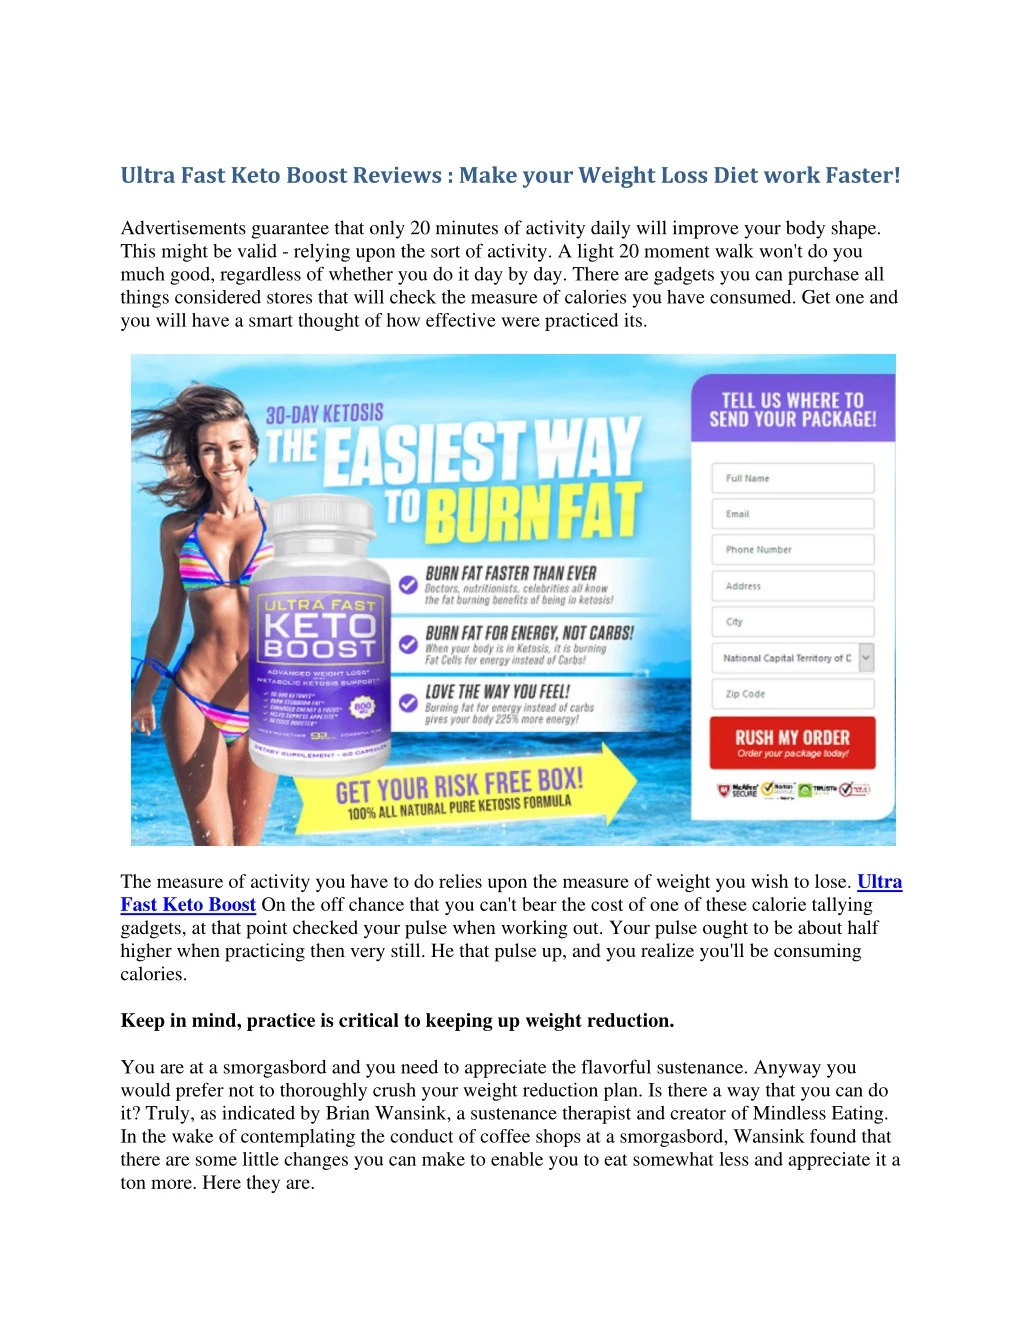 ultra fast keto boost reviews make your weight